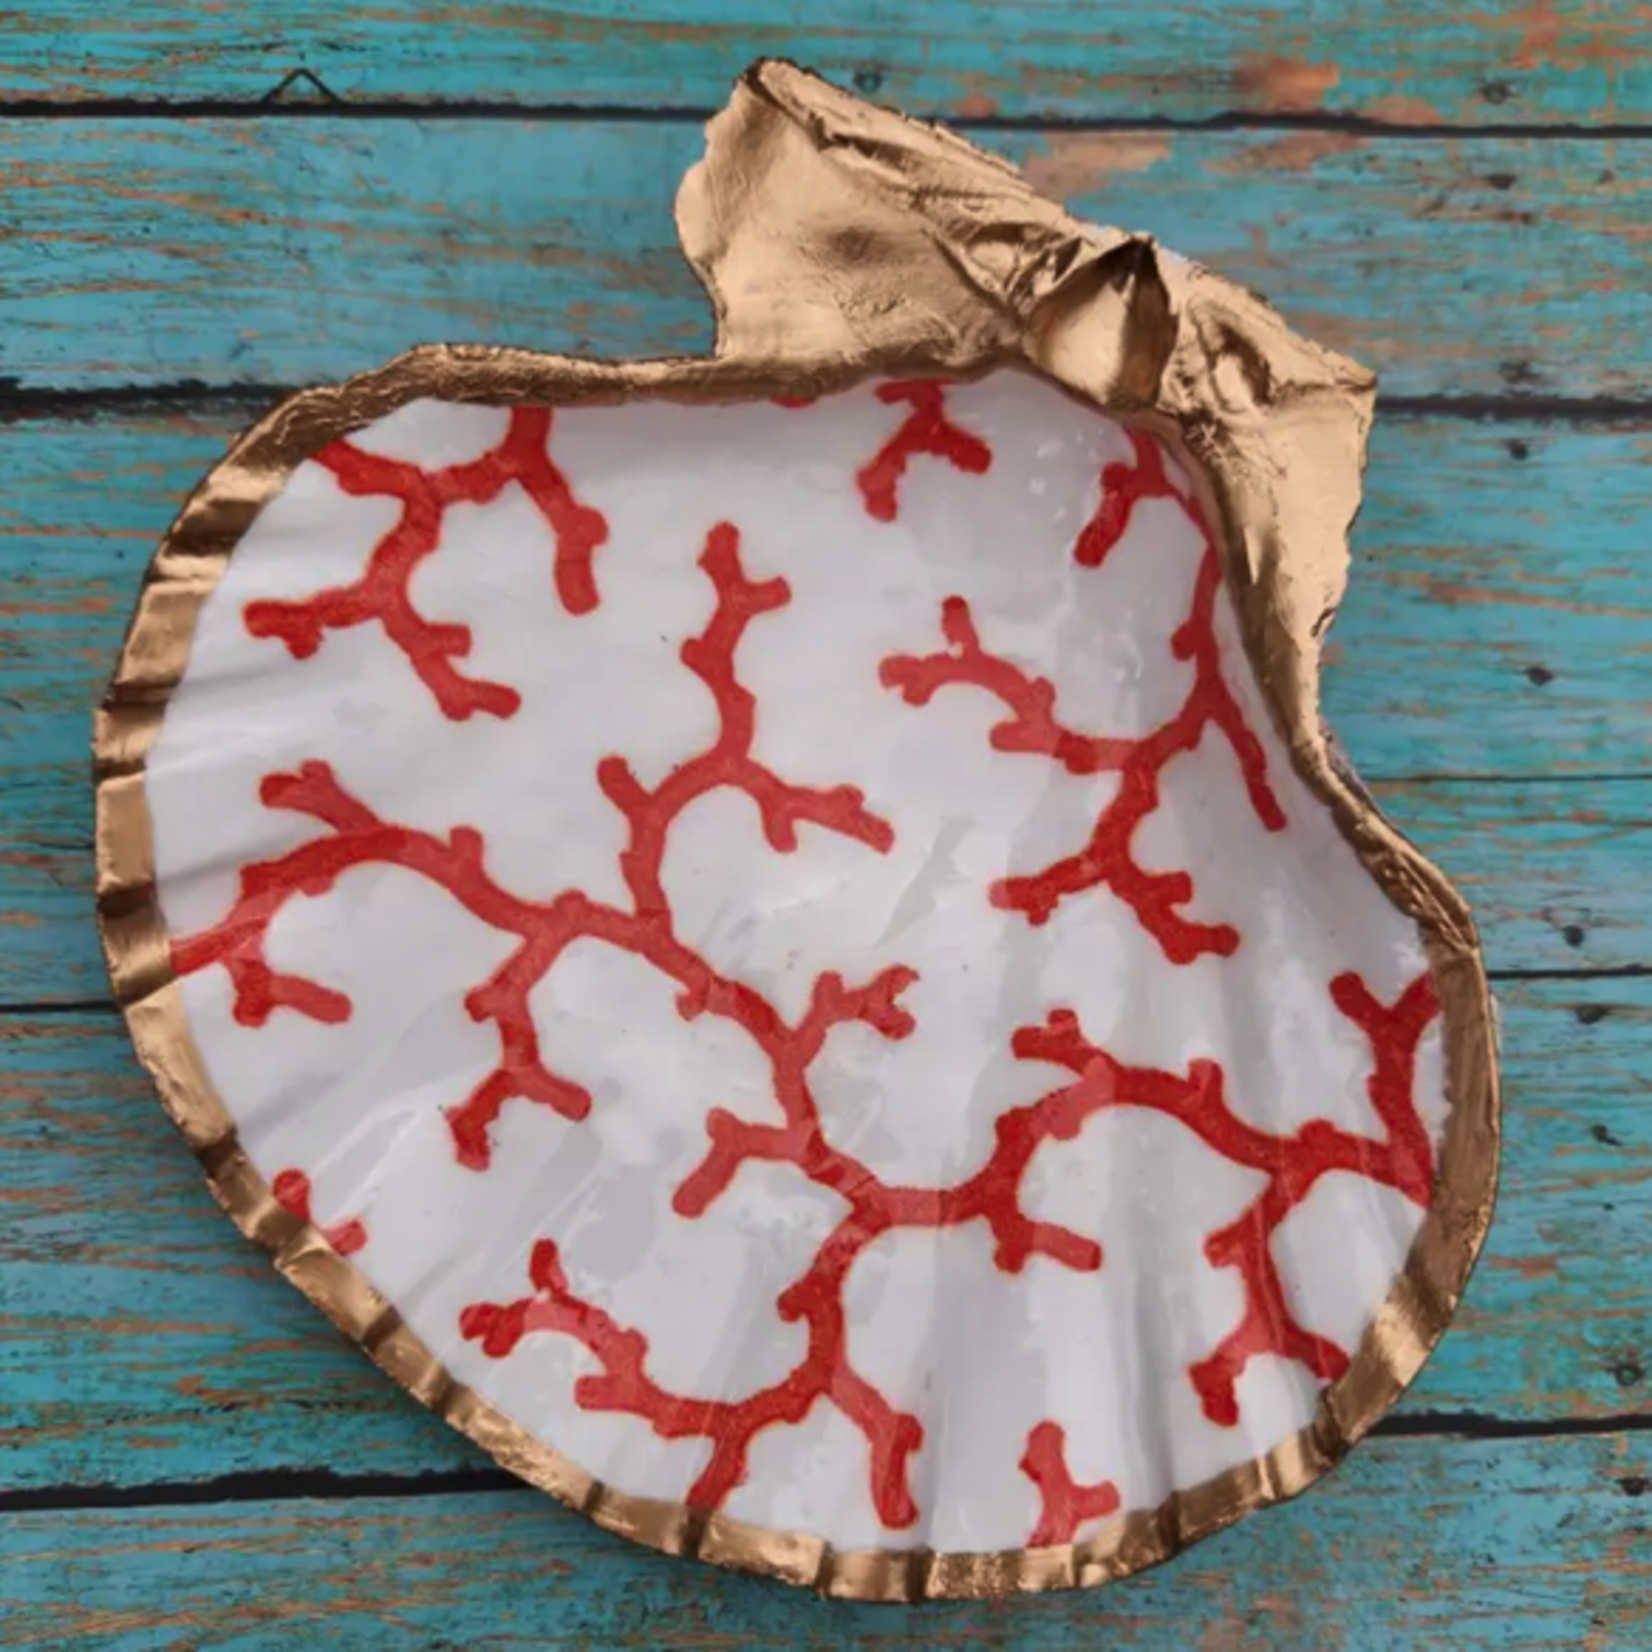 Outside The Box 5" Red Coral Trinket Hand Painted Shell Decor - EACH SOLD SEPARATELY